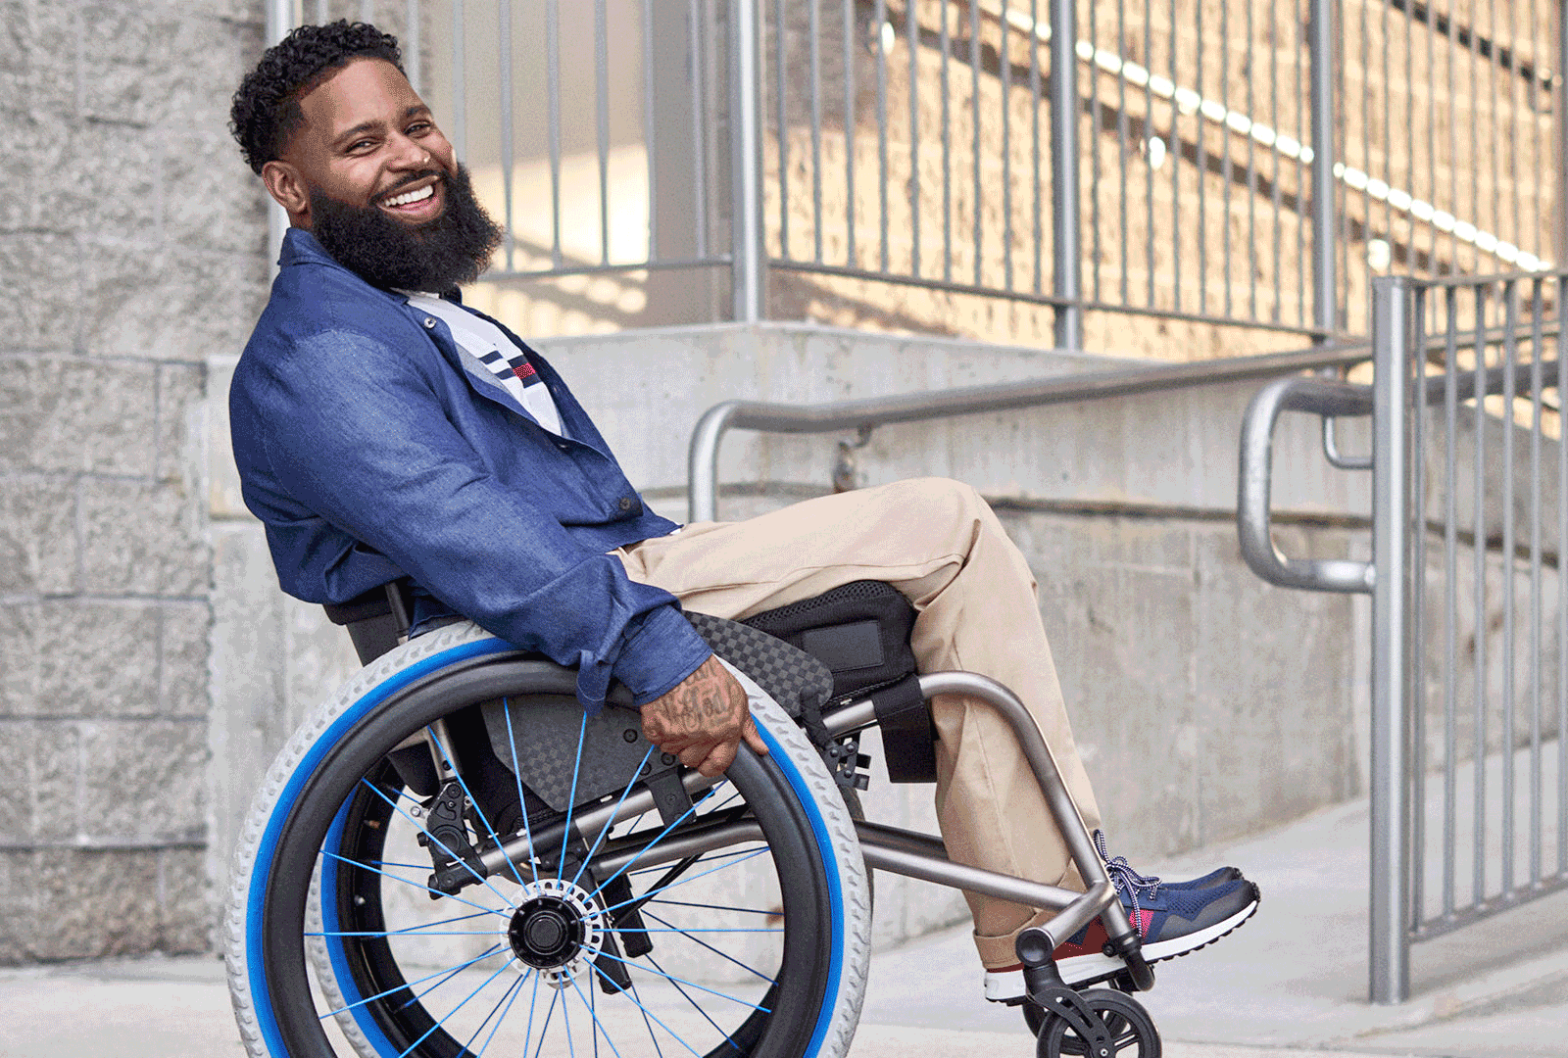 Wes doing a wheely in his wheelchair wearing a blue sport coat and khaki pants provided by Tommy Hilfiger for the IMIXX adaptive fashion event.